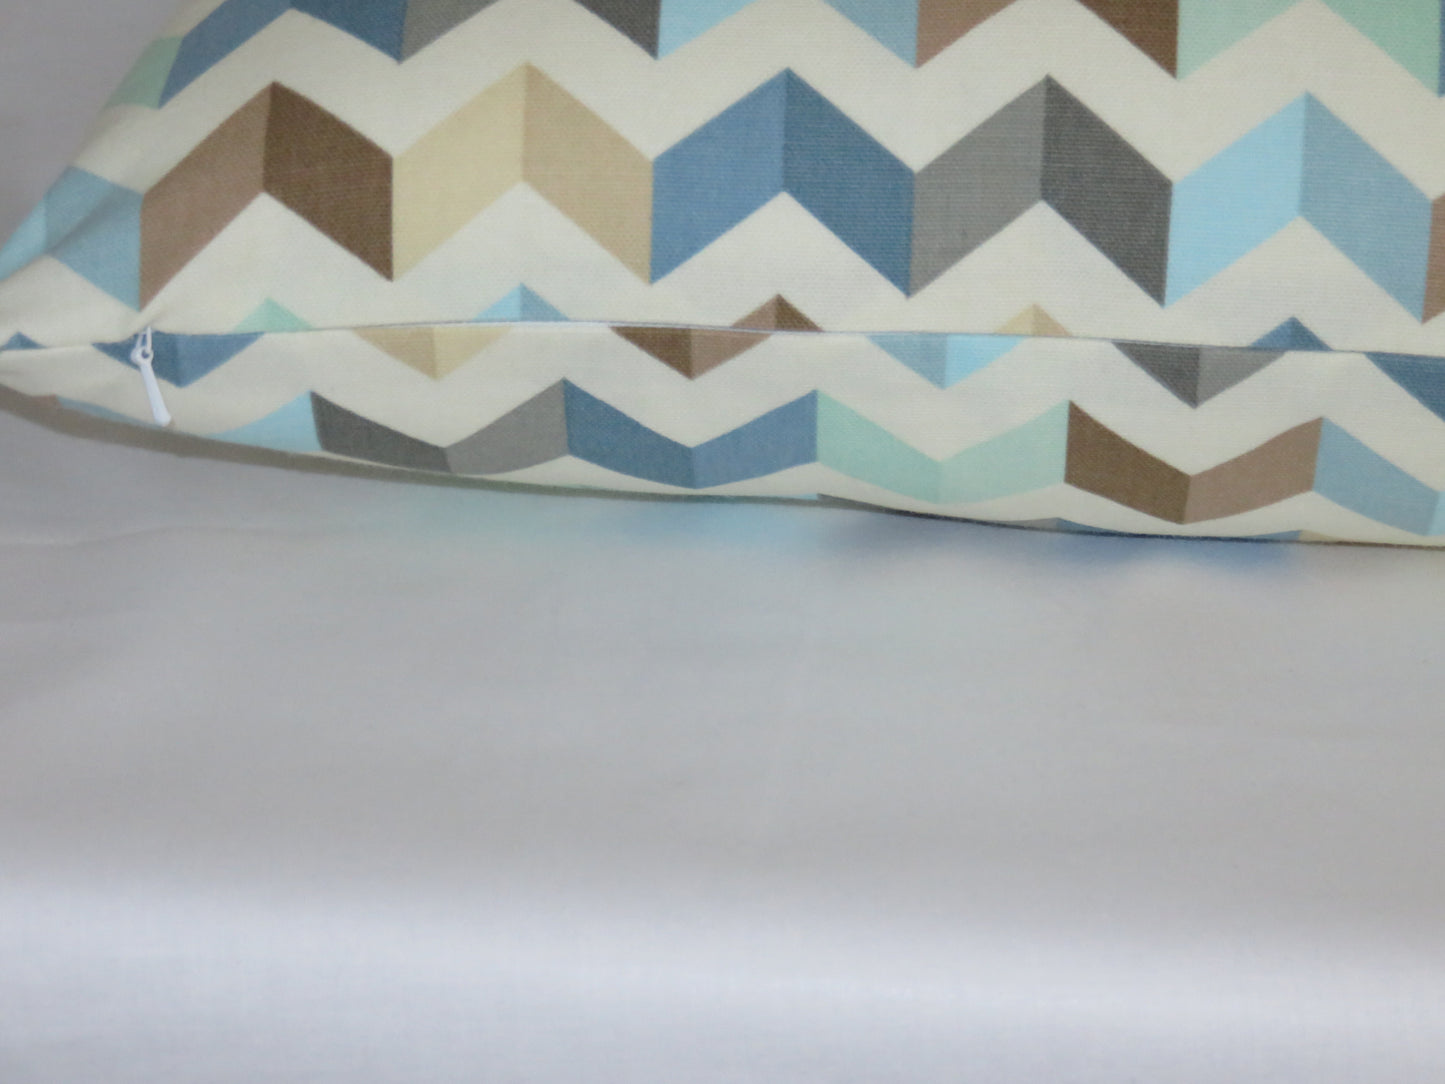 Seaglass Chevron Pillow Cover, 17" Sq. Cotton, Waverly Tip Top Etheral, Blue Mint Grey Brown White